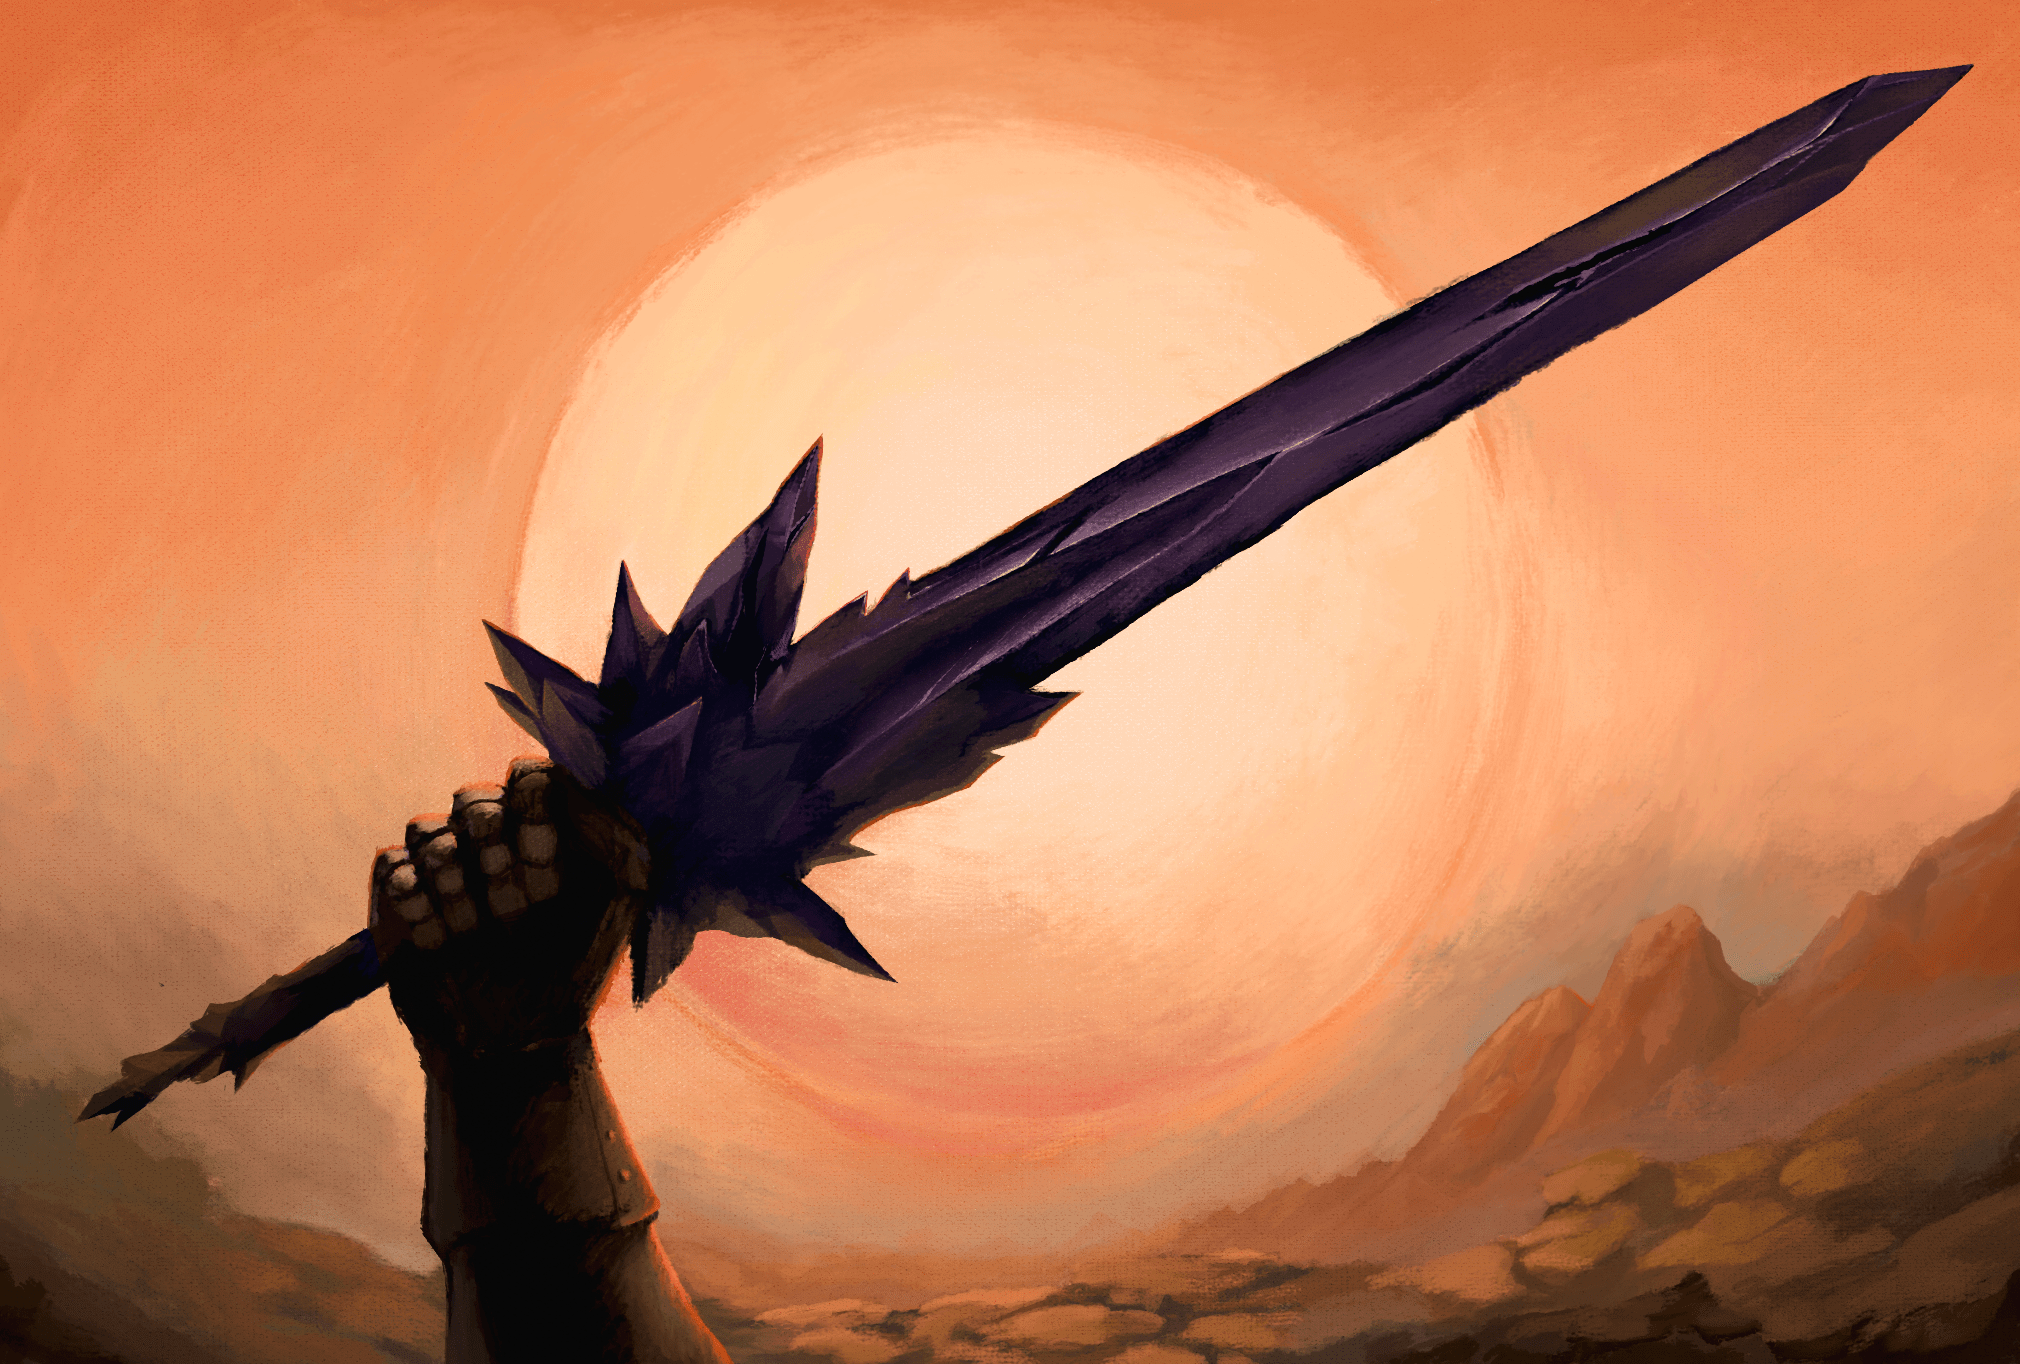 Materialized sword by Charles Ouvrard